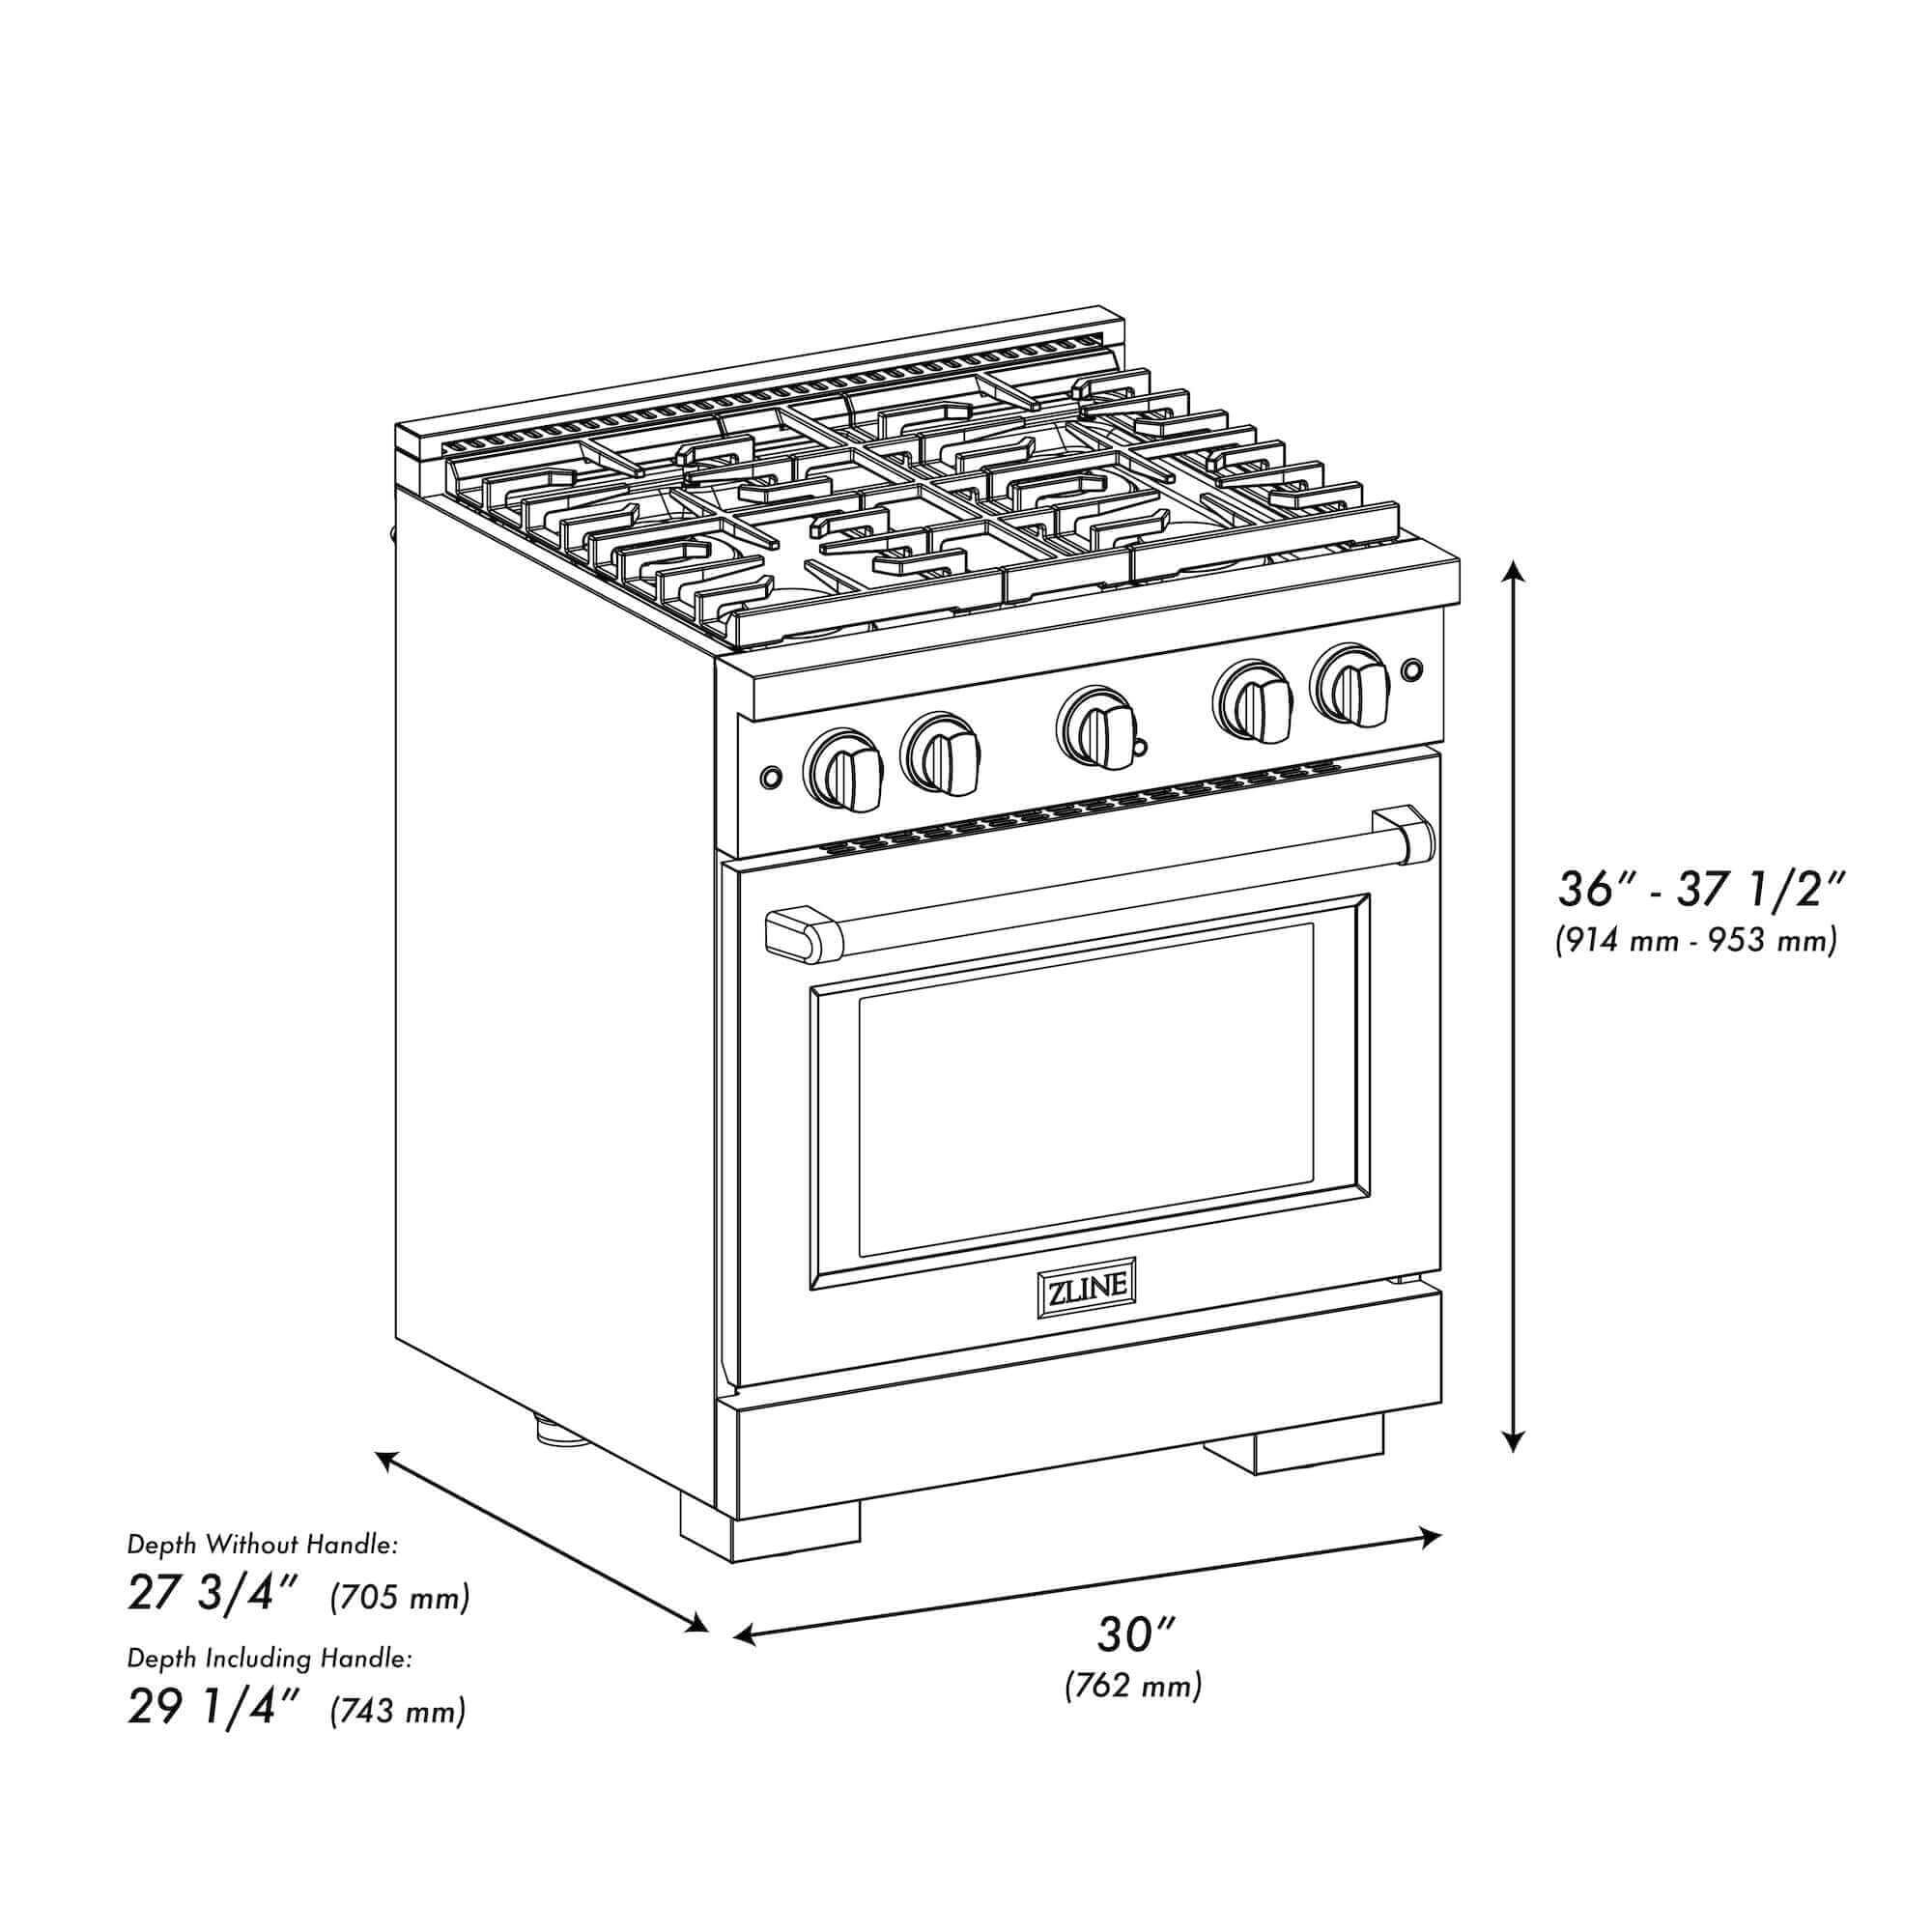 ZLINE 30" Stainless Steel Gas Range measurements and dimensions.